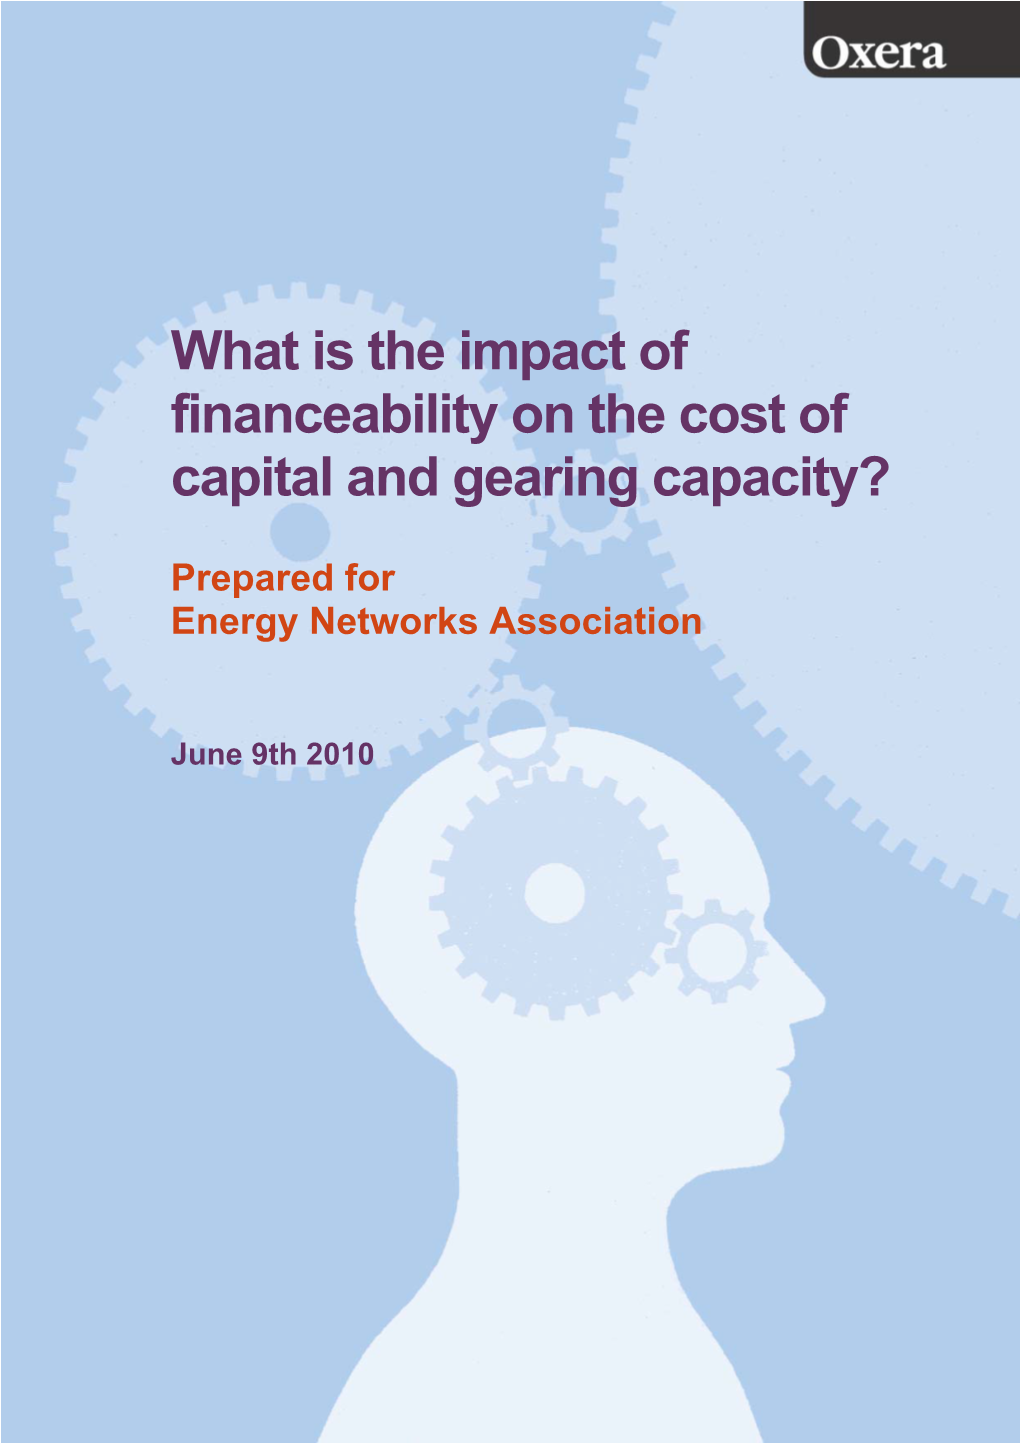 What Is the Impact of Financeability on the Cost of Capital and Gearing Capacity?